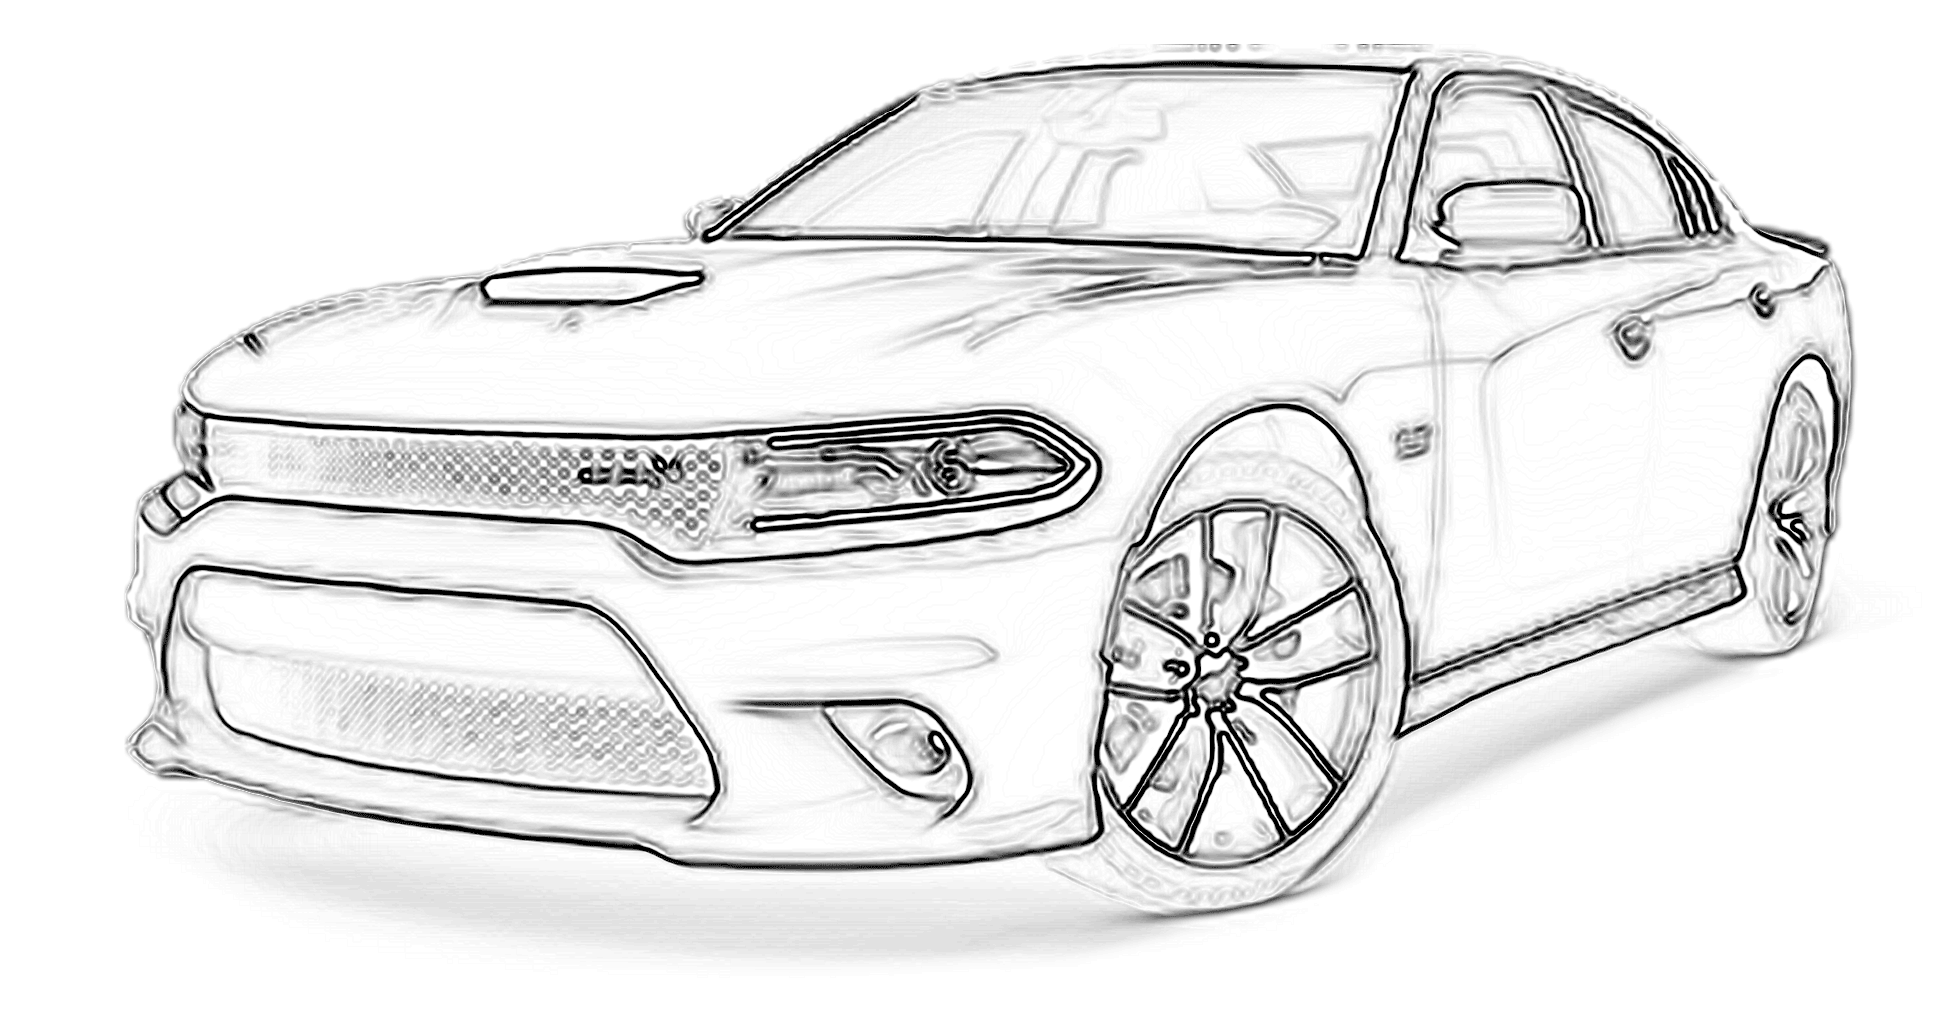 Free Dodge Charger Coloring Pages, Download Free Dodge Charger Coloring